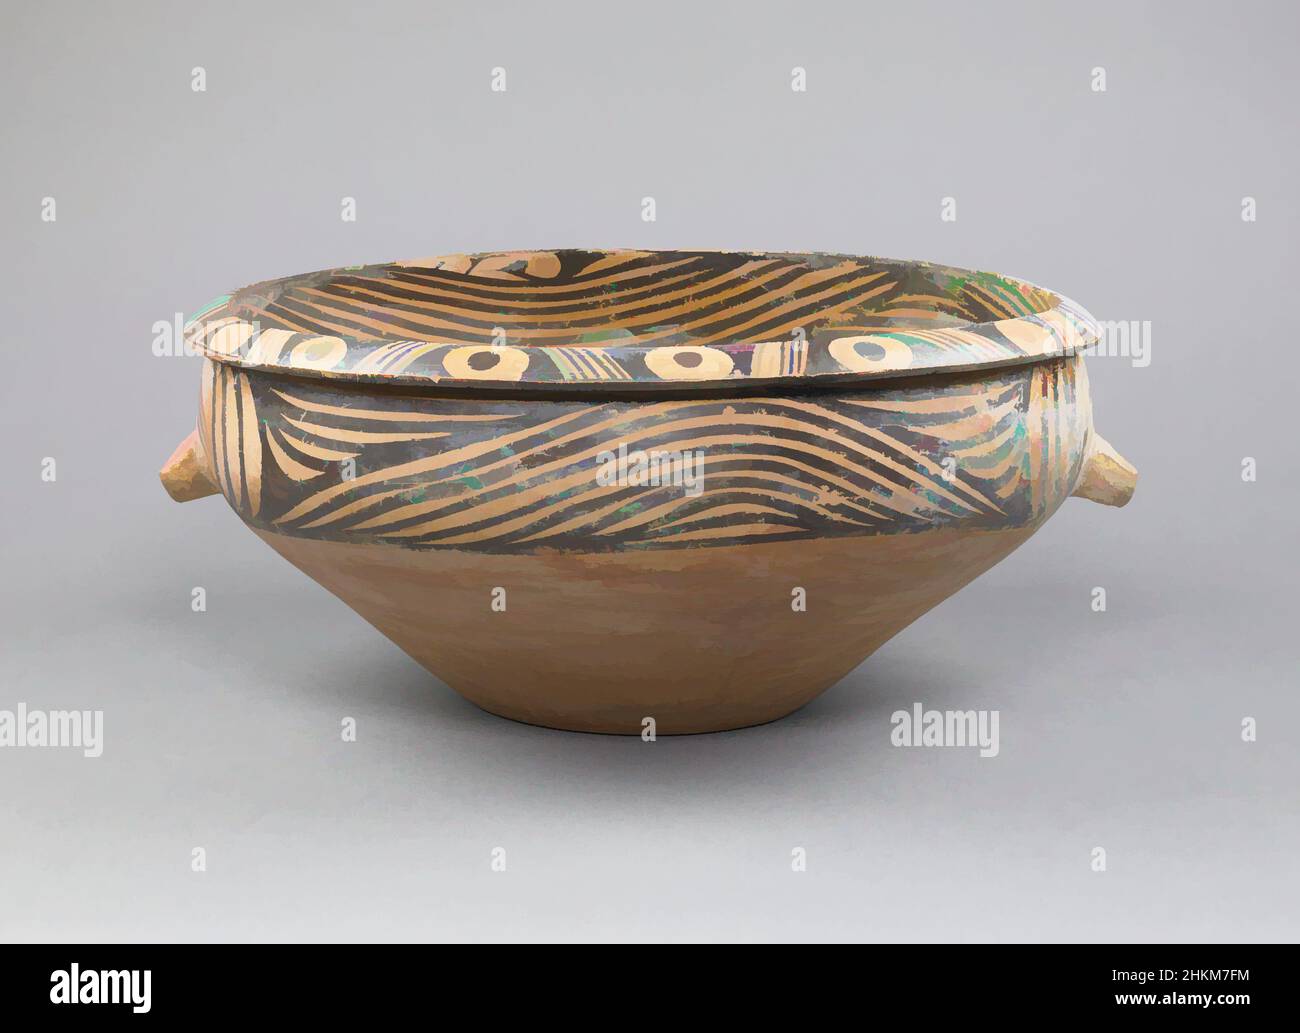 https://c8.alamy.com/comp/2HKM7FM/art-inspired-by-basin-pen-with-abstract-decoration-gansu-yangshao-culture-3100-2700-bc-chinese-neolithic-period-8000-2000-bc-c3000-bc-burnished-earthenware-with-painted-black-slip-decoration-gansu-province-china-asia-ceramics-containers-7-x-17-12-x-16-in-178-x-445-x-classic-works-modernized-by-artotop-with-a-splash-of-modernity-shapes-color-and-value-eye-catching-visual-impact-on-art-emotions-through-freedom-of-artworks-in-a-contemporary-way-a-timeless-message-pursuing-a-wildly-creative-new-direction-artists-turning-to-the-digital-medium-and-creating-the-artotop-nft-2HKM7FM.jpg